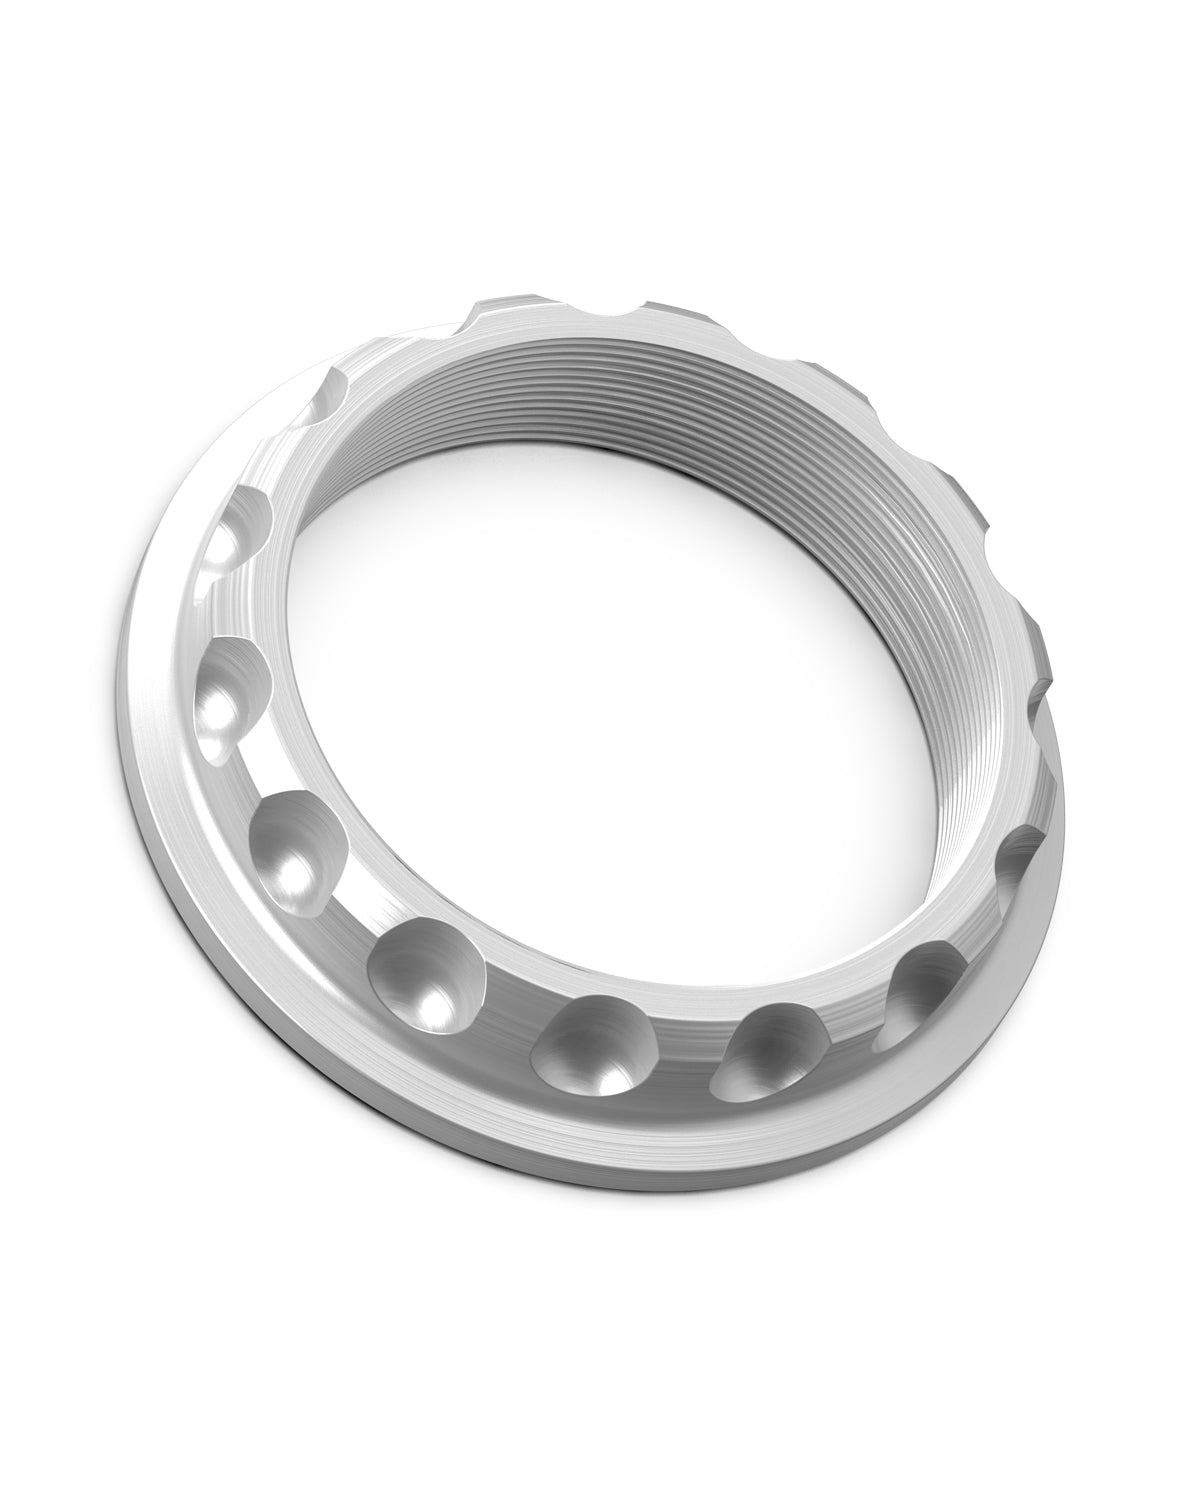 Super Touring Tech Nut _ Anodized Silver